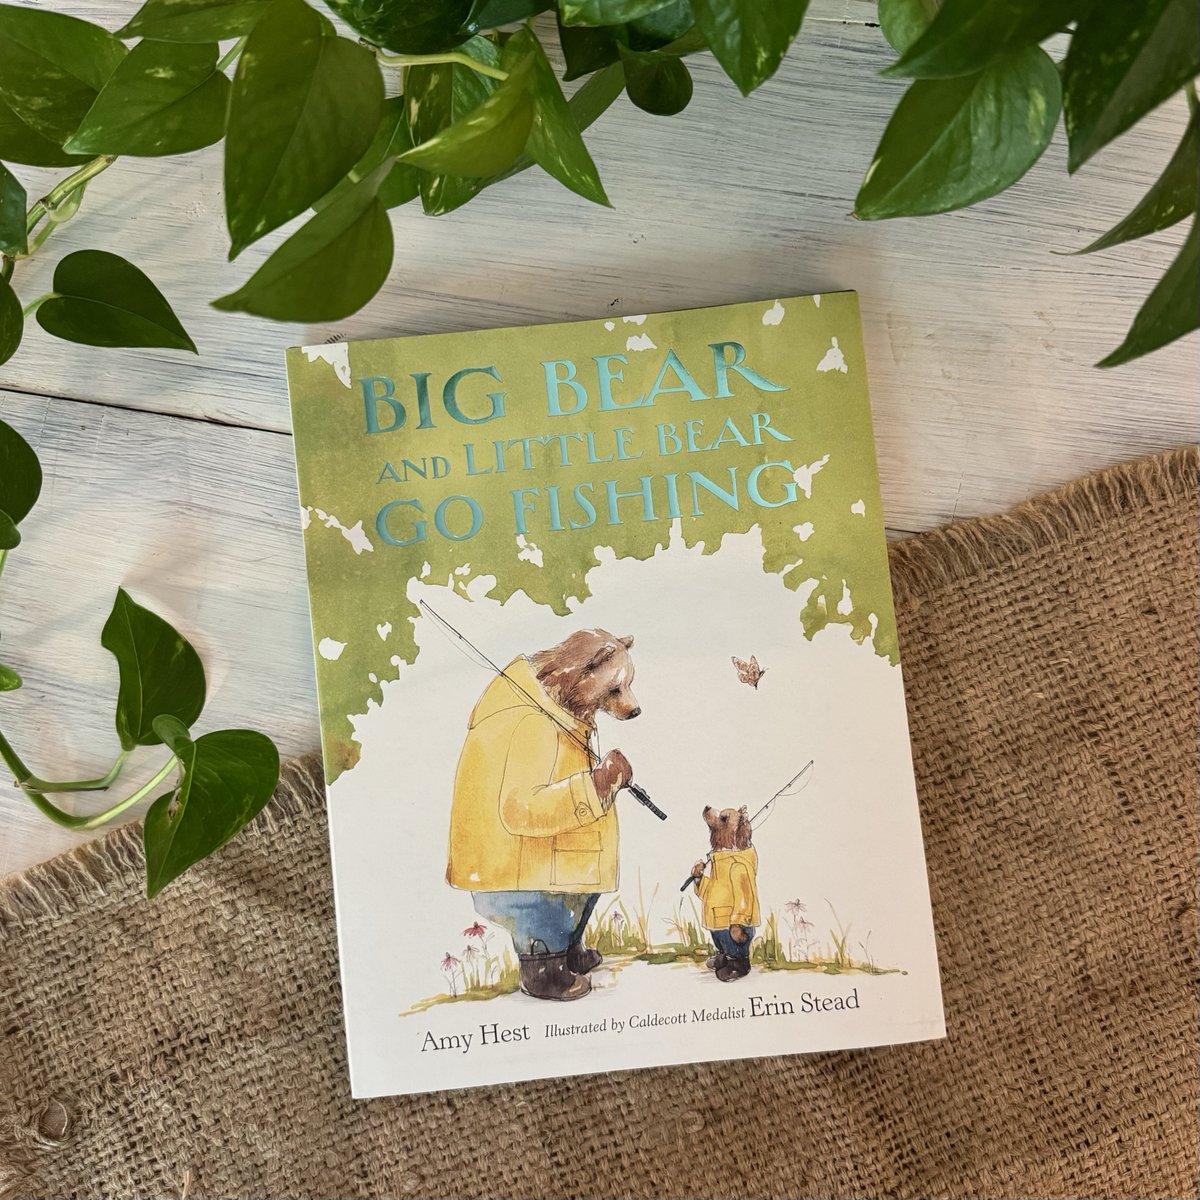 Happy book birthday to BIG BEAR AND LITTLE BEAR GO FISHING! This sweet new #picturebook about a bear duo on an unhurried fishing trip is on shelves today! ow.ly/lqA050RNYgF #bookbirthday